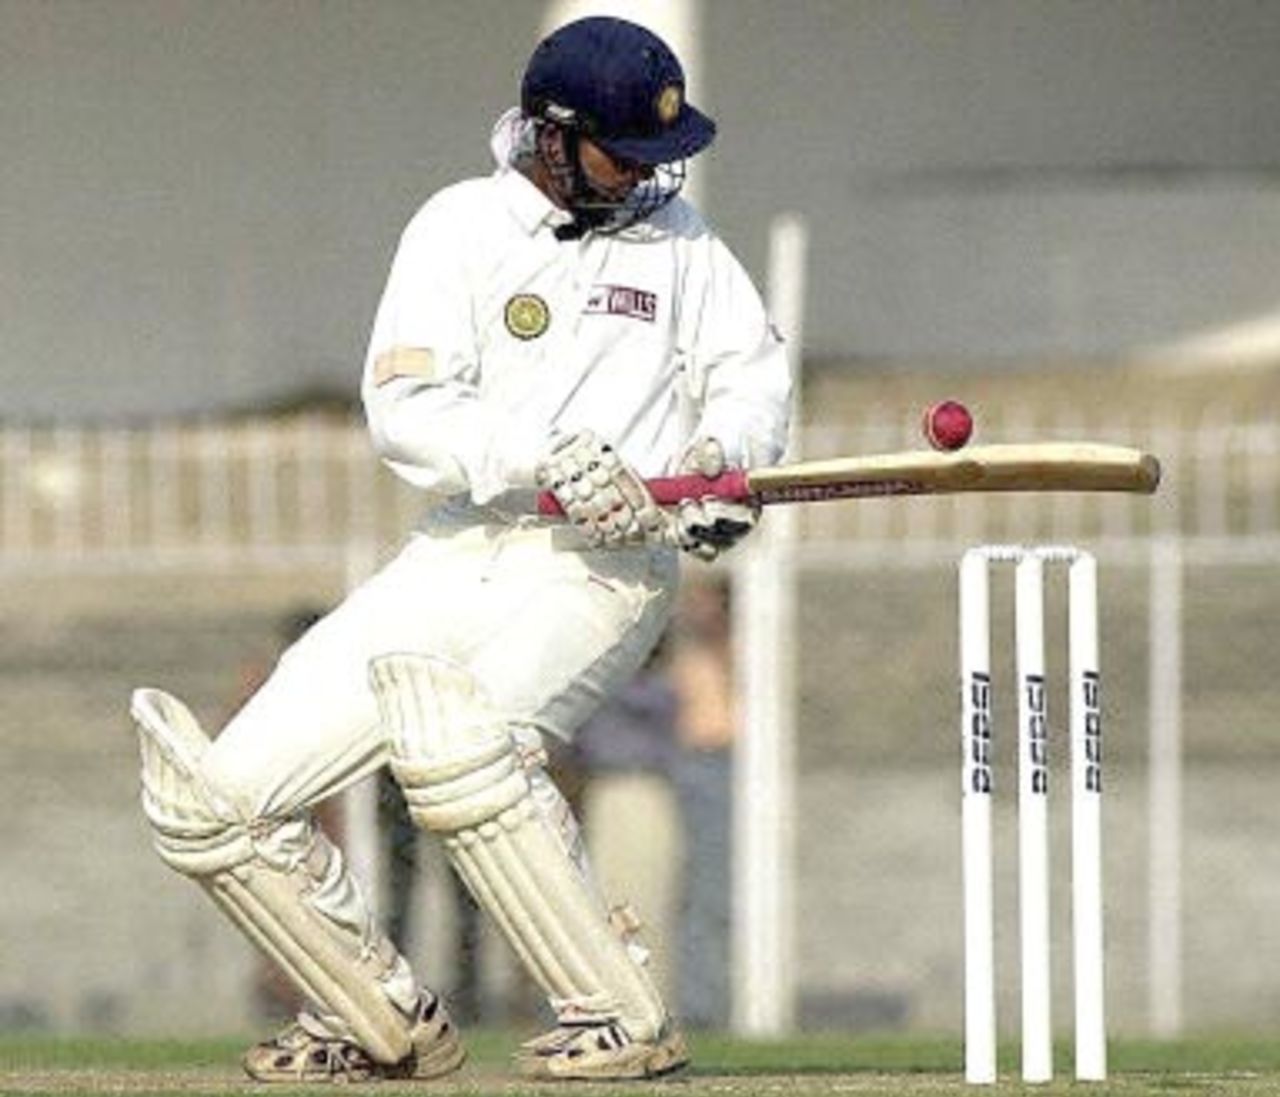 Indian opening batsman S Ramesh Australian hits a delivery during the first day of the first three-day cricket match against Australia in Nagpur 17 February 2001. India were at 71 for 1 at the end of day's play in reply to Australia's 291.